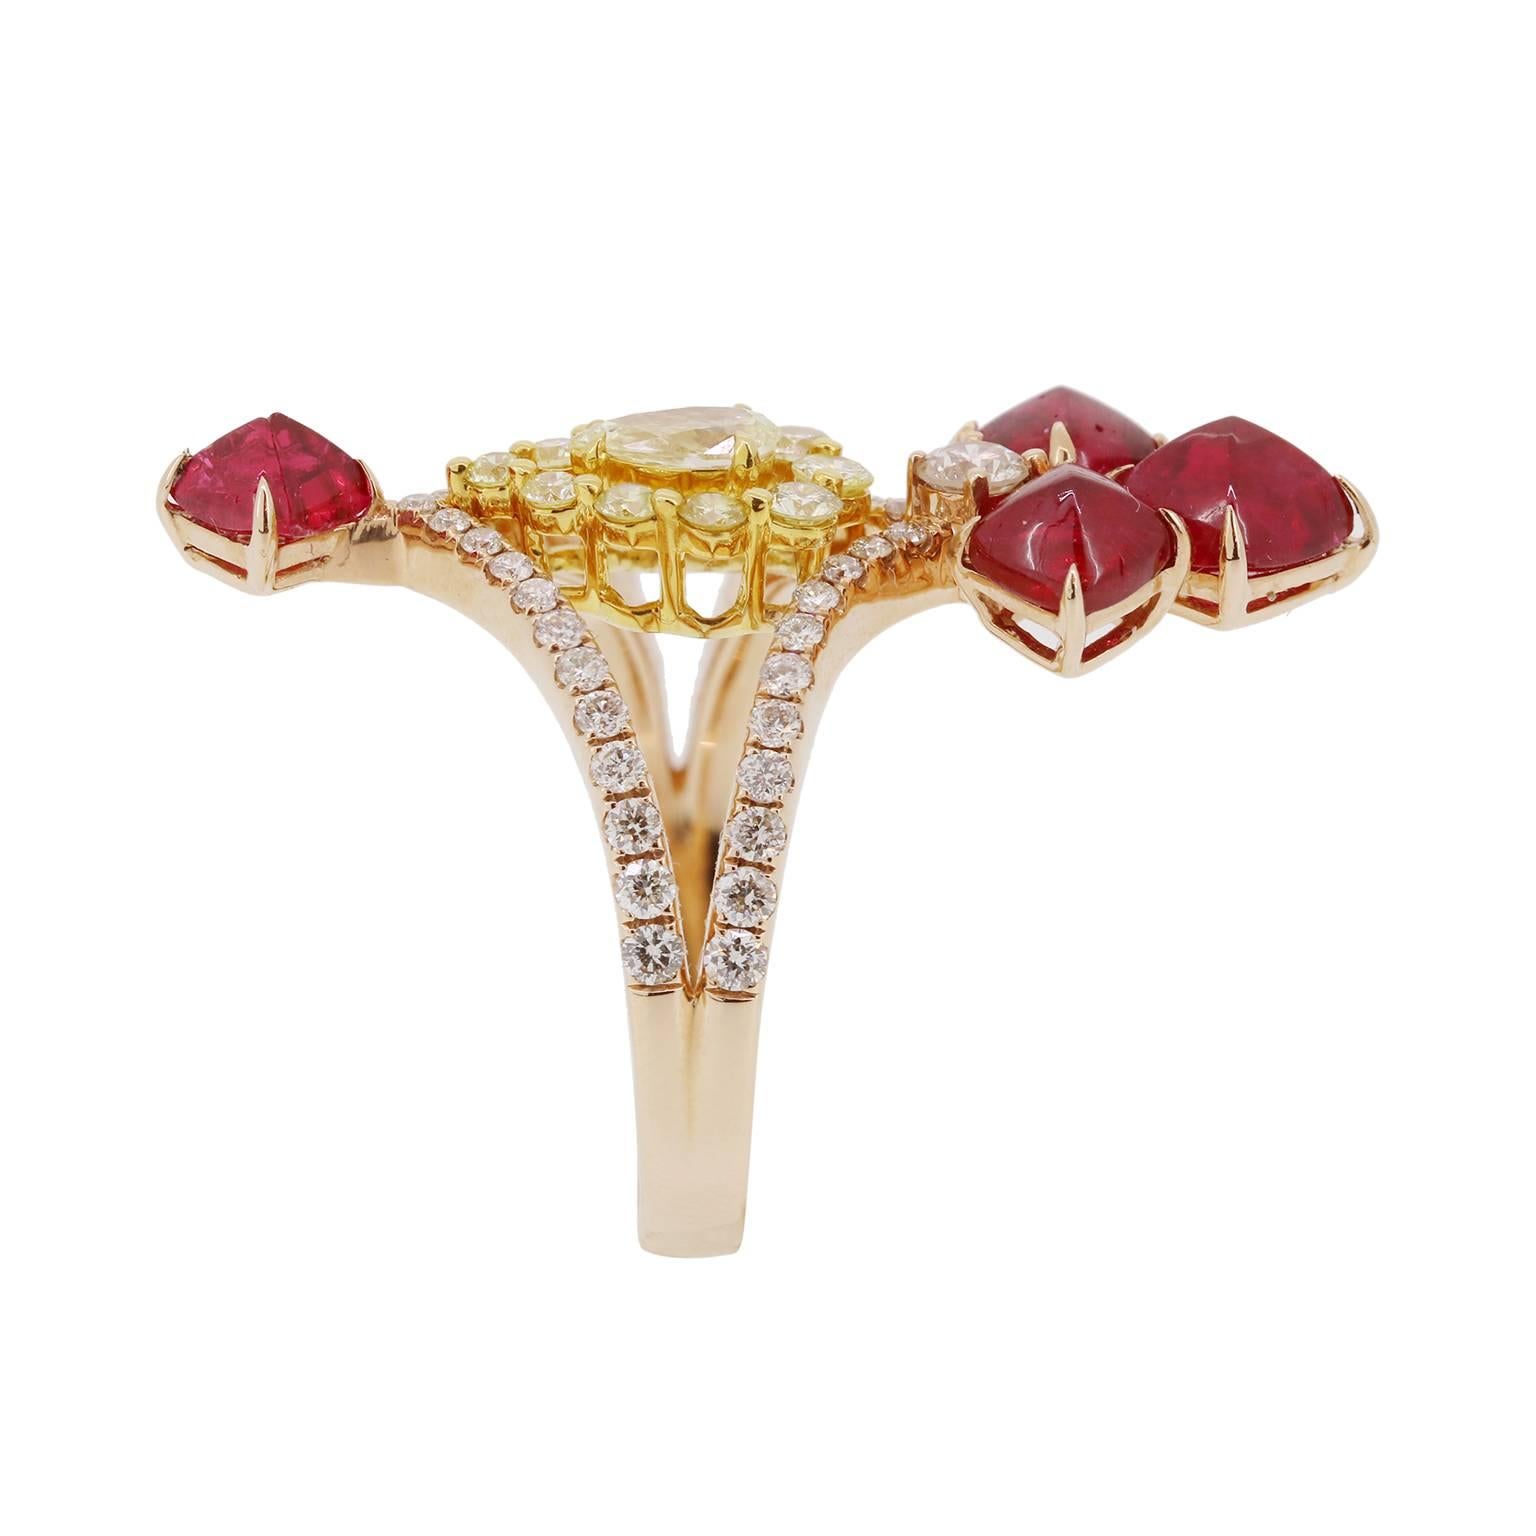 This unique north to south design with 3.27cts of red spinel and 0.61cts of yellow diamonds will fit flawlessly on your finger.  With and added 0.68 cts of white diamond accents through out the design down to the shank for that extra bit of